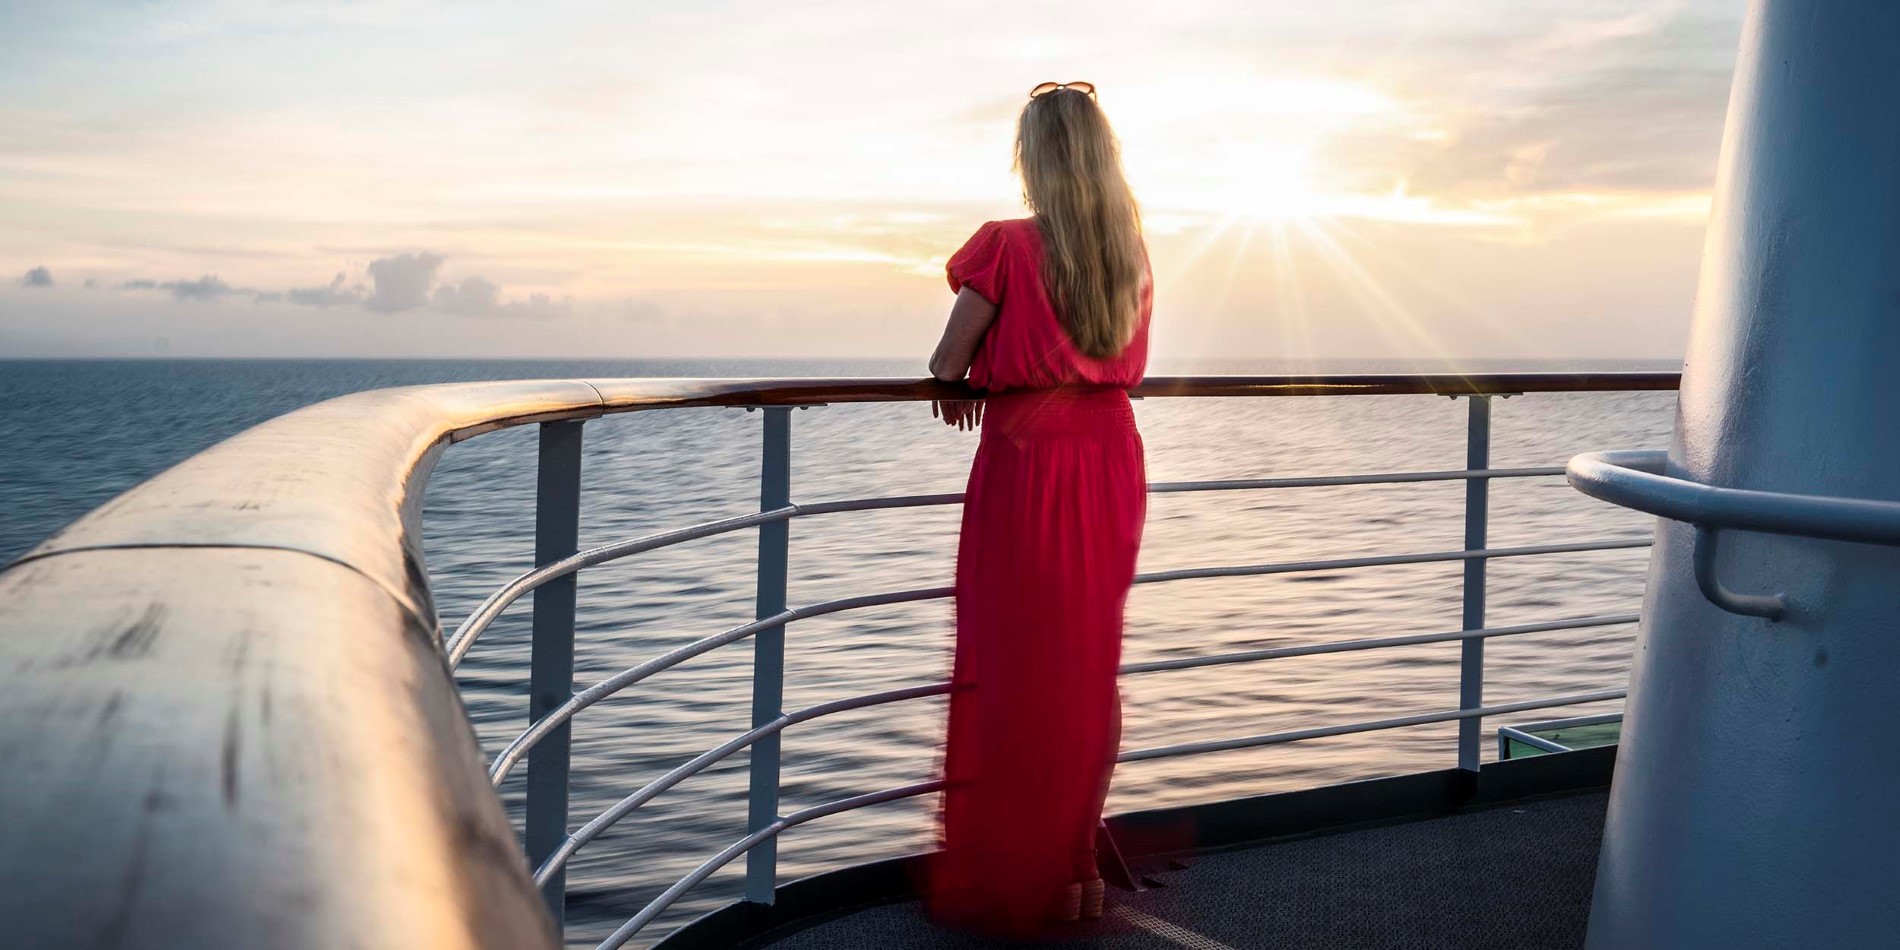 Take the  vistas from deck while at sea.